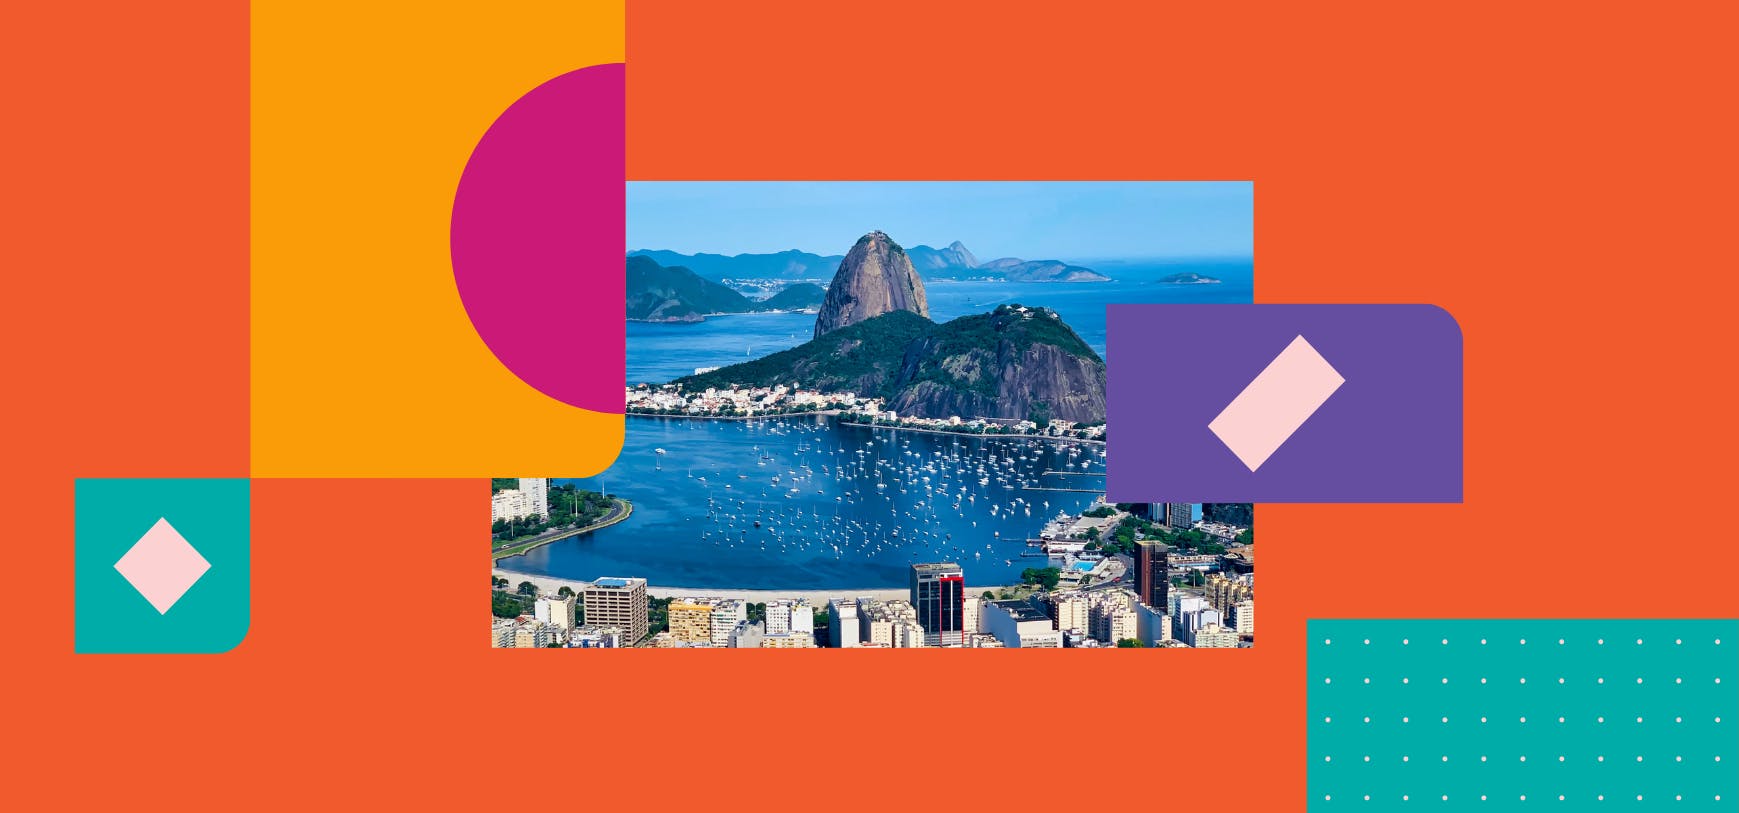 An image of Rio de Janeiro in Brazil. The city’s Sugarloaf Mountain is in the background. Guanabara Bay is displayed in the foreground of the image, with many boats dotted throughout.